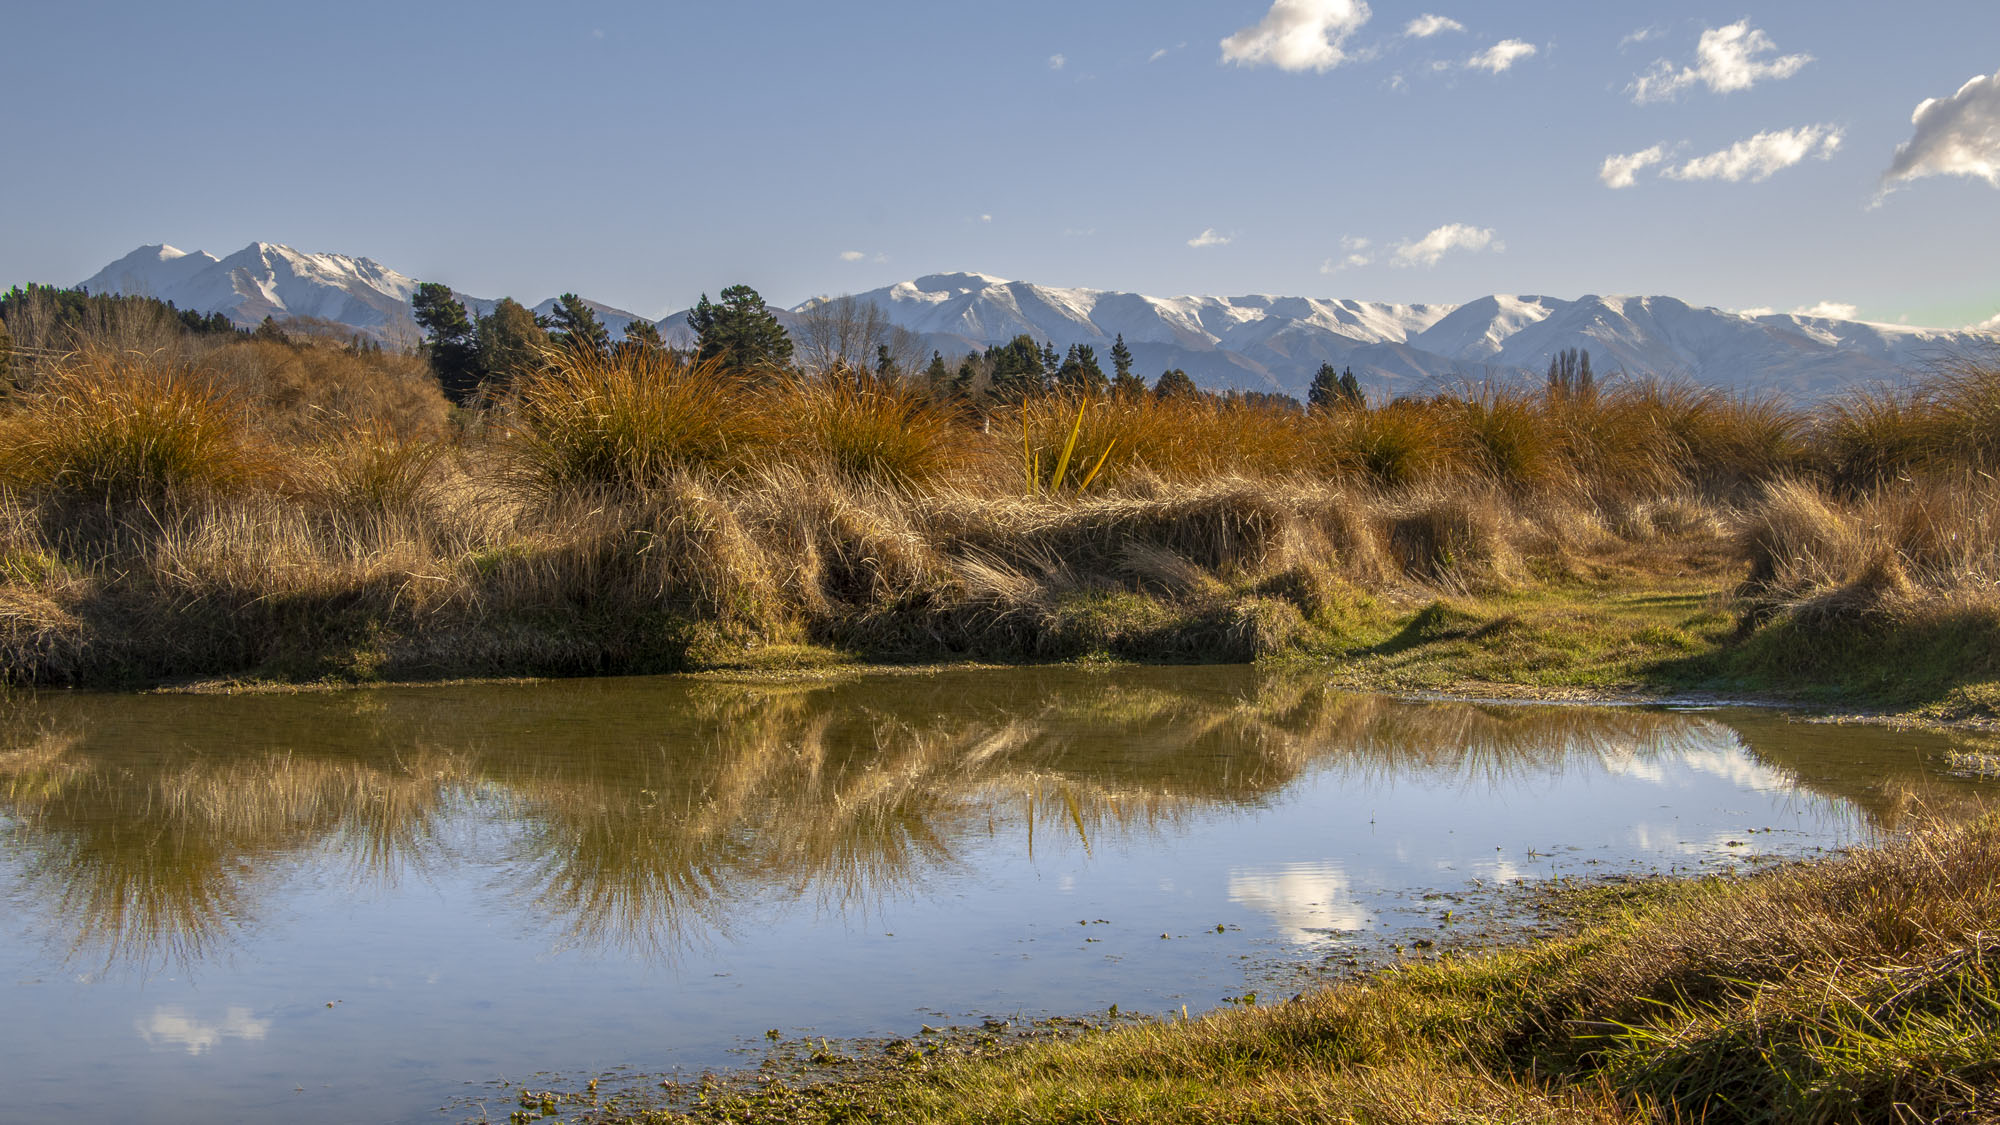 Look out for the wildlife depicted in the ancient Maori rock art, admire the native plants and spot the springs as you wind your way through the wetlands and over sections of boardwalk which have been protected and reinvigorated by a group of local volunteers.